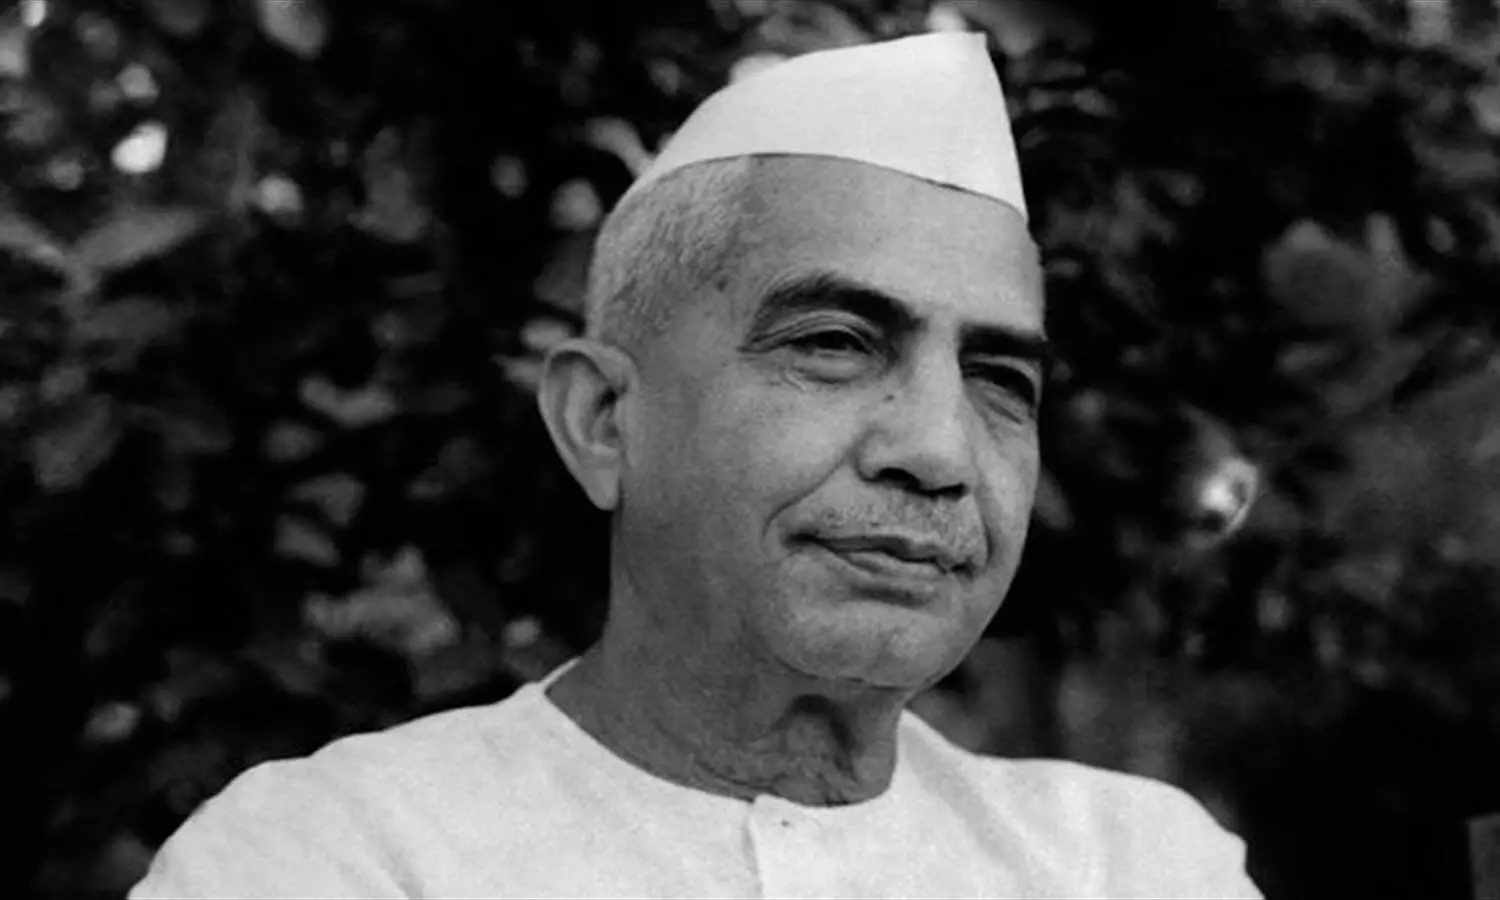 Former Prime Minister Chaudhary Charan Singh